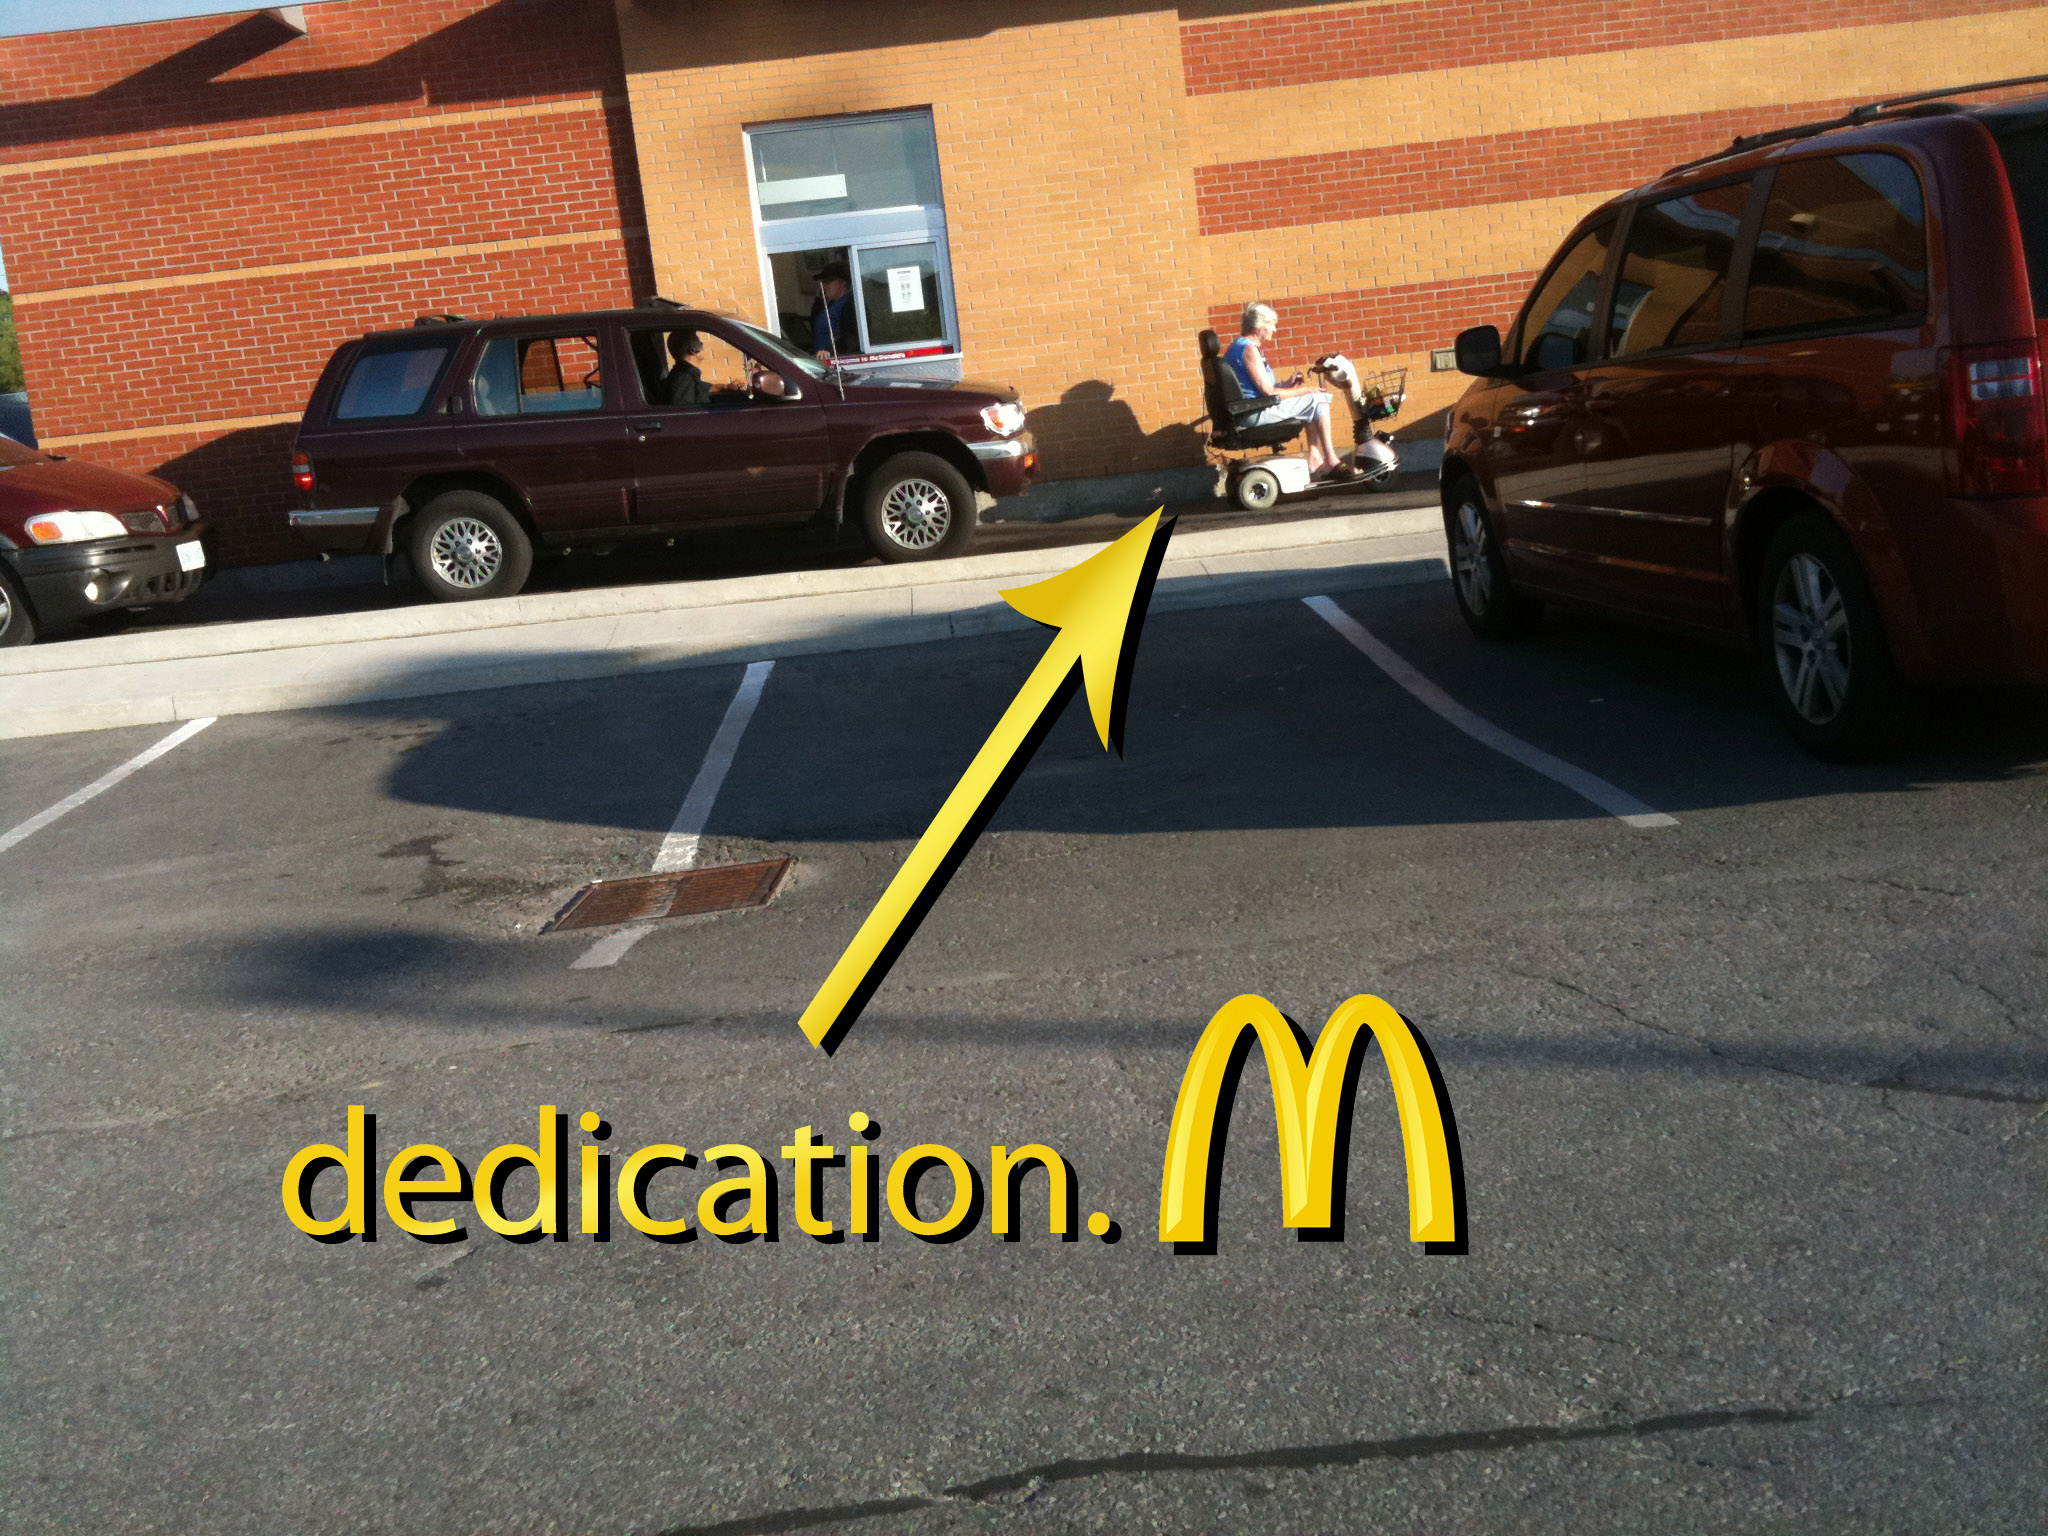 Walking out of MickeyD's and thats what i saw. 
she's lovin' it.